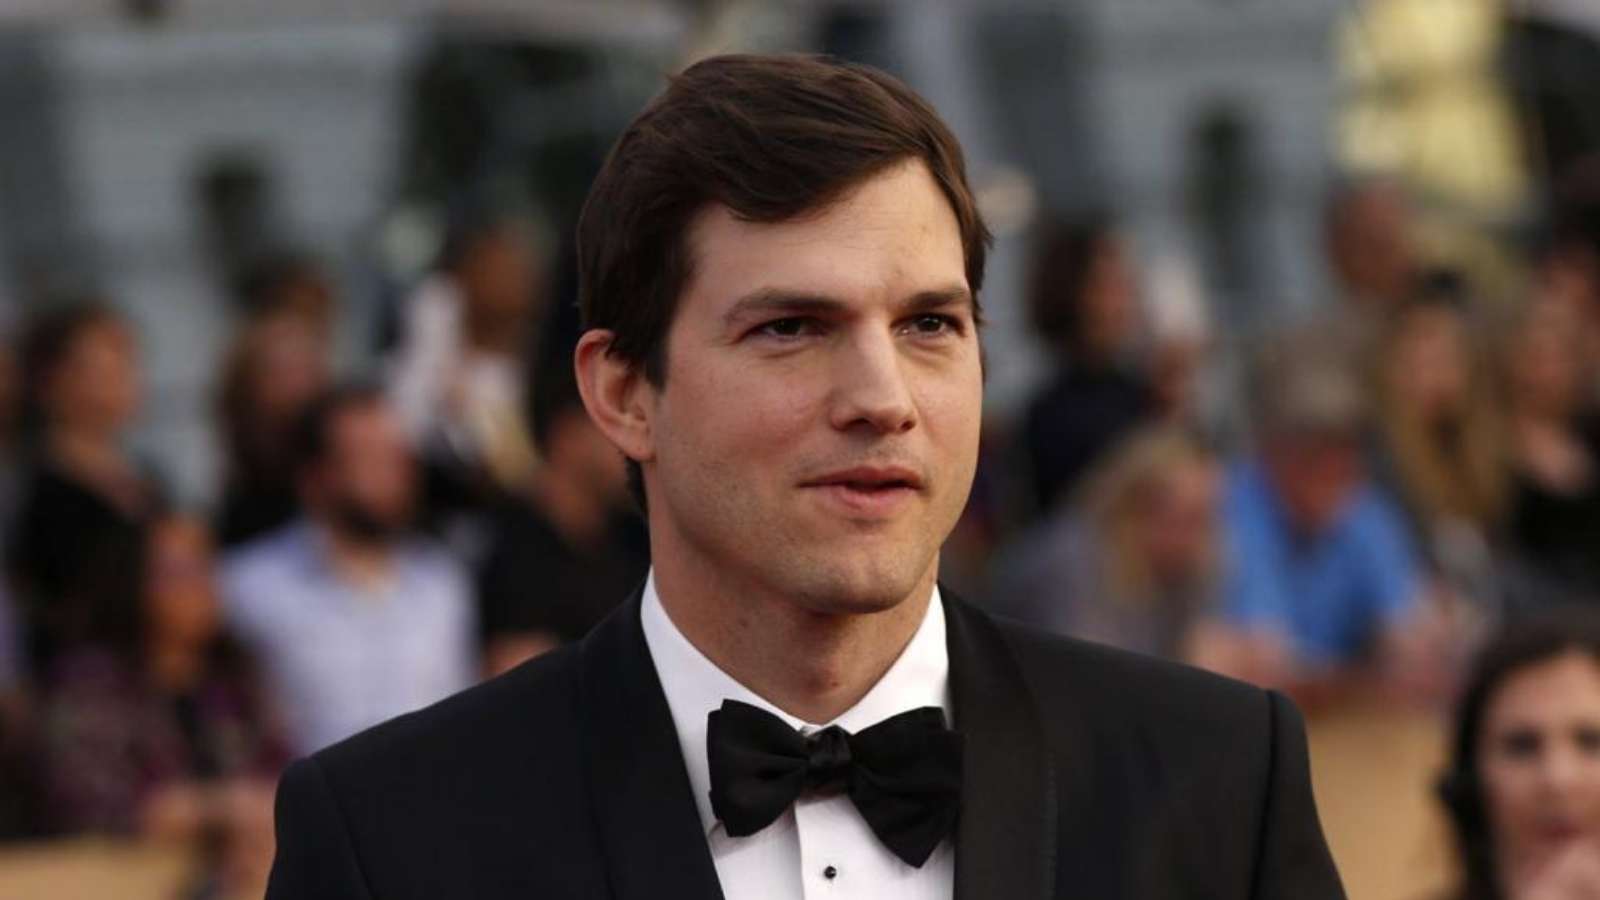 Ashton Kutcher pursued biochemical engineering for his twin brother